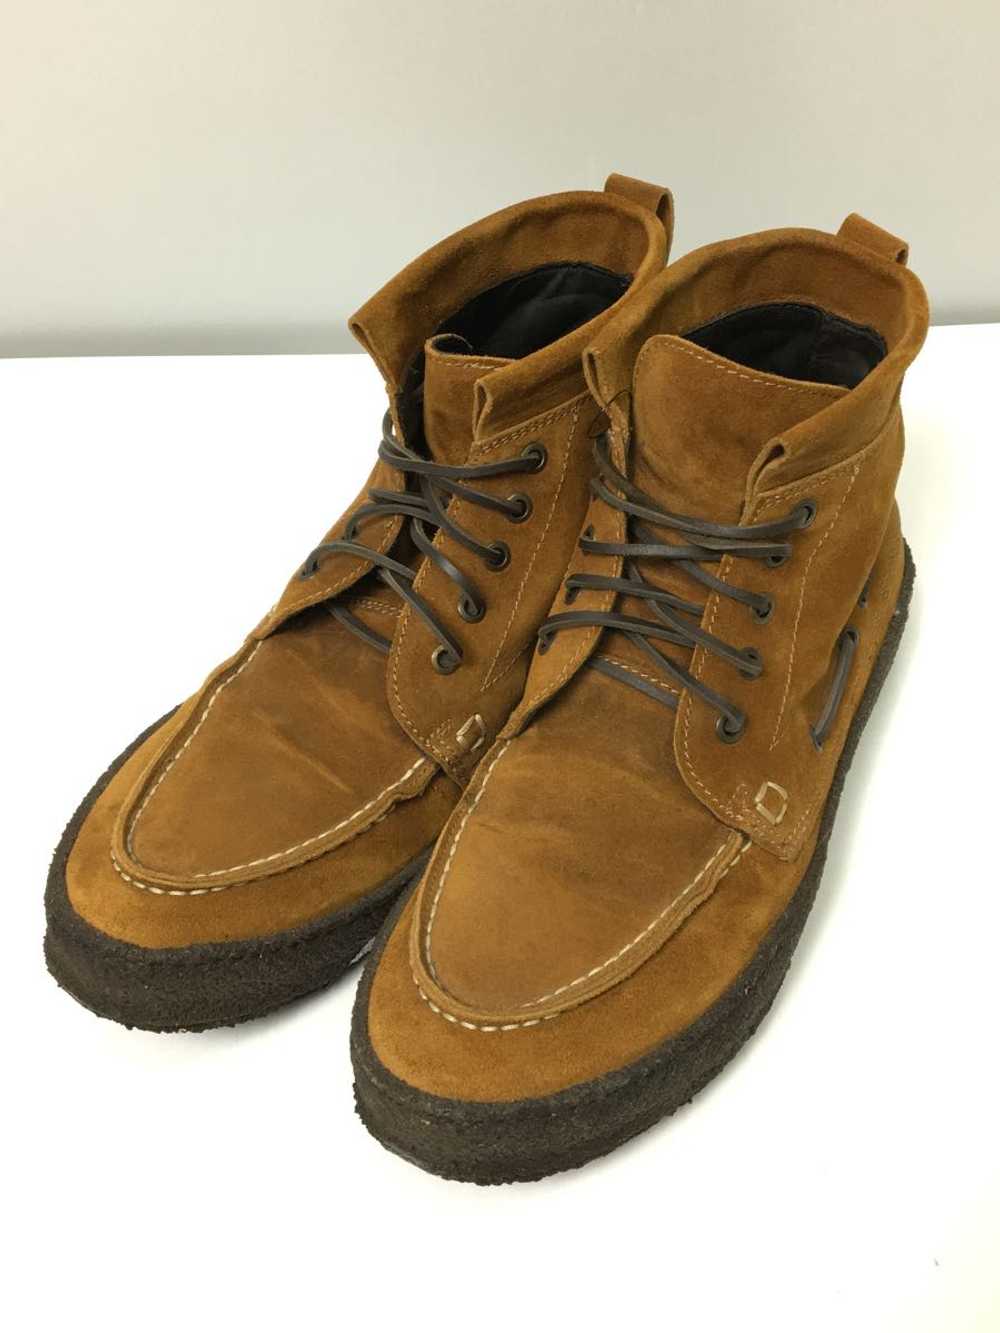 Punto Pigro Boots/43/Brw Shoes BYL25 - image 2